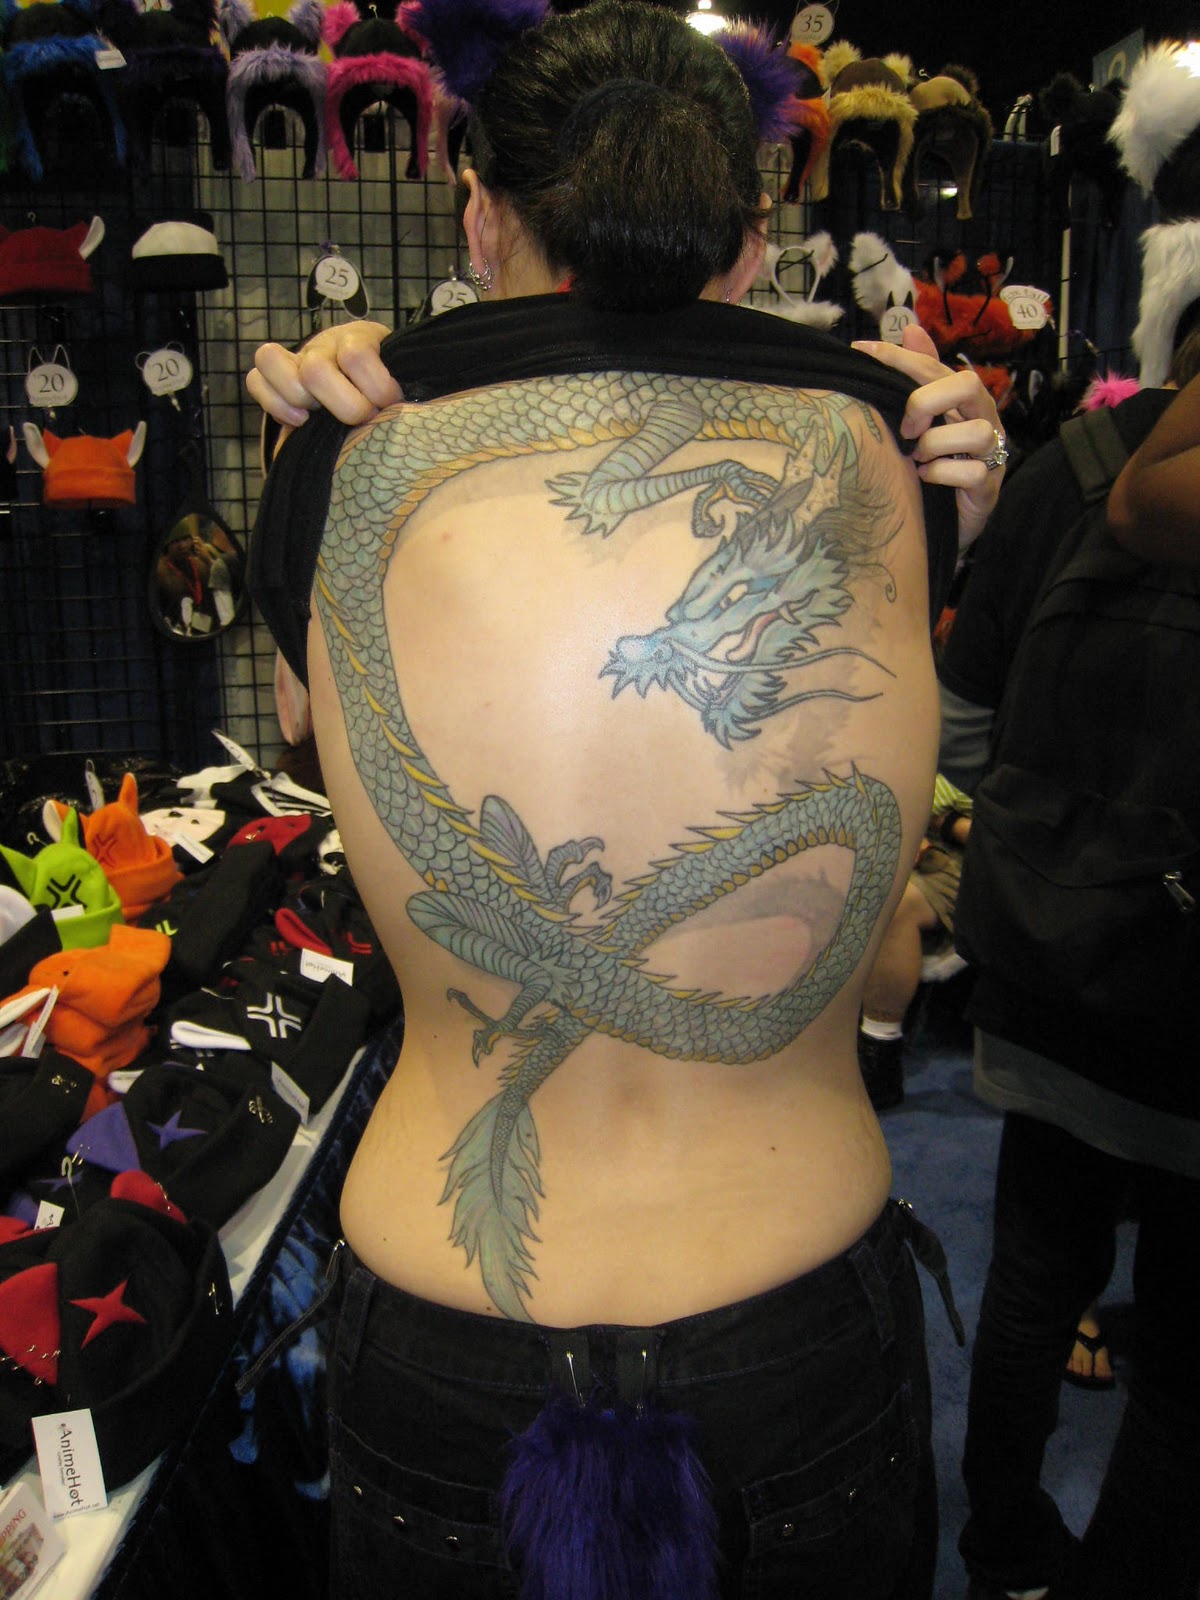 Image gallary 5: Cute and latest Body Art Tattoos Designs pictures